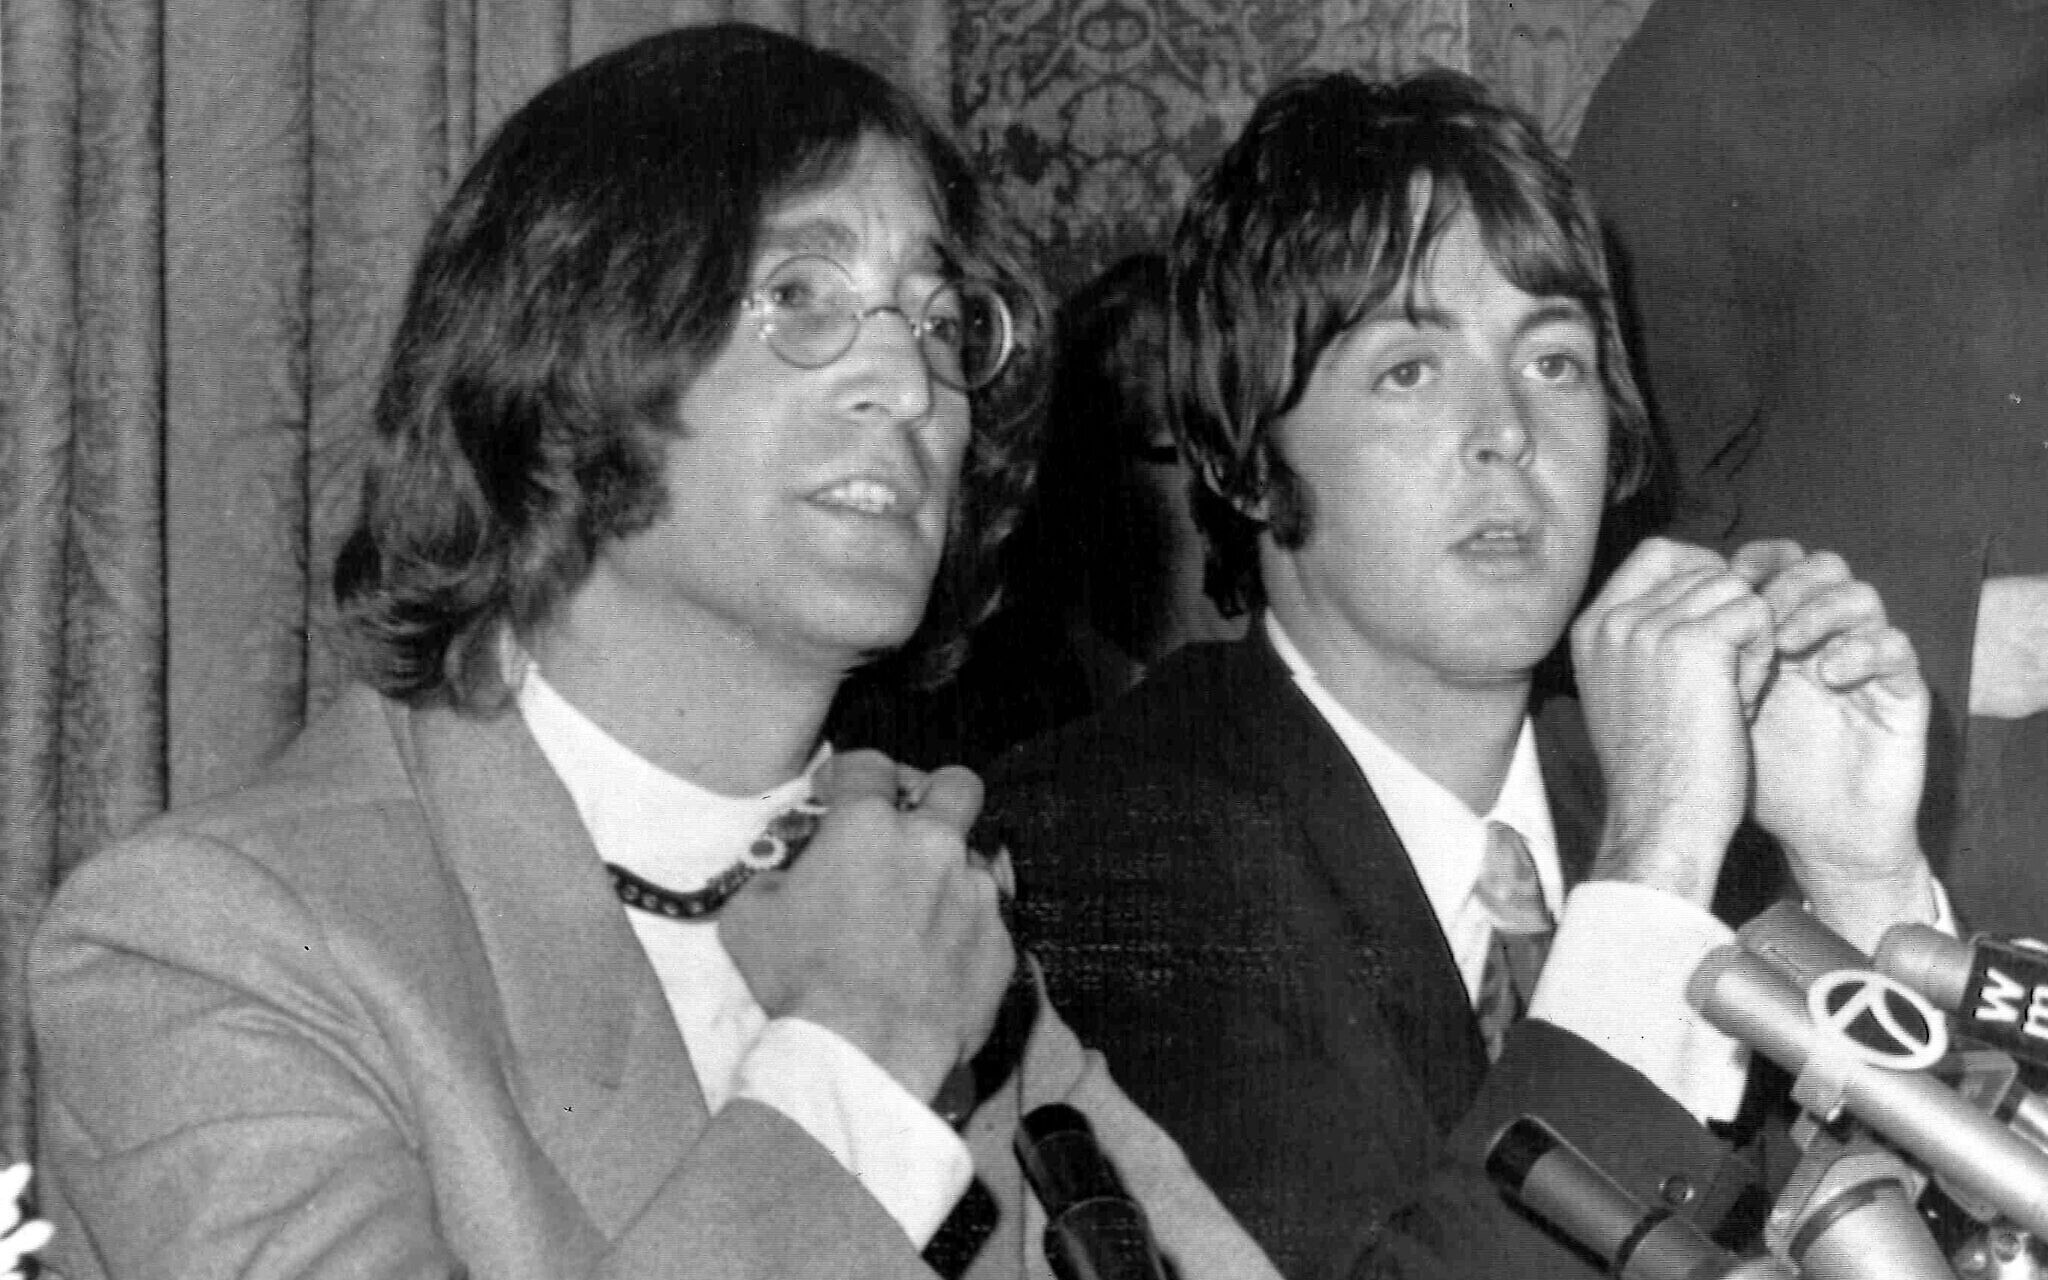 Found: Lennon and McCartney's comedy about the messiah | The Times of Israel